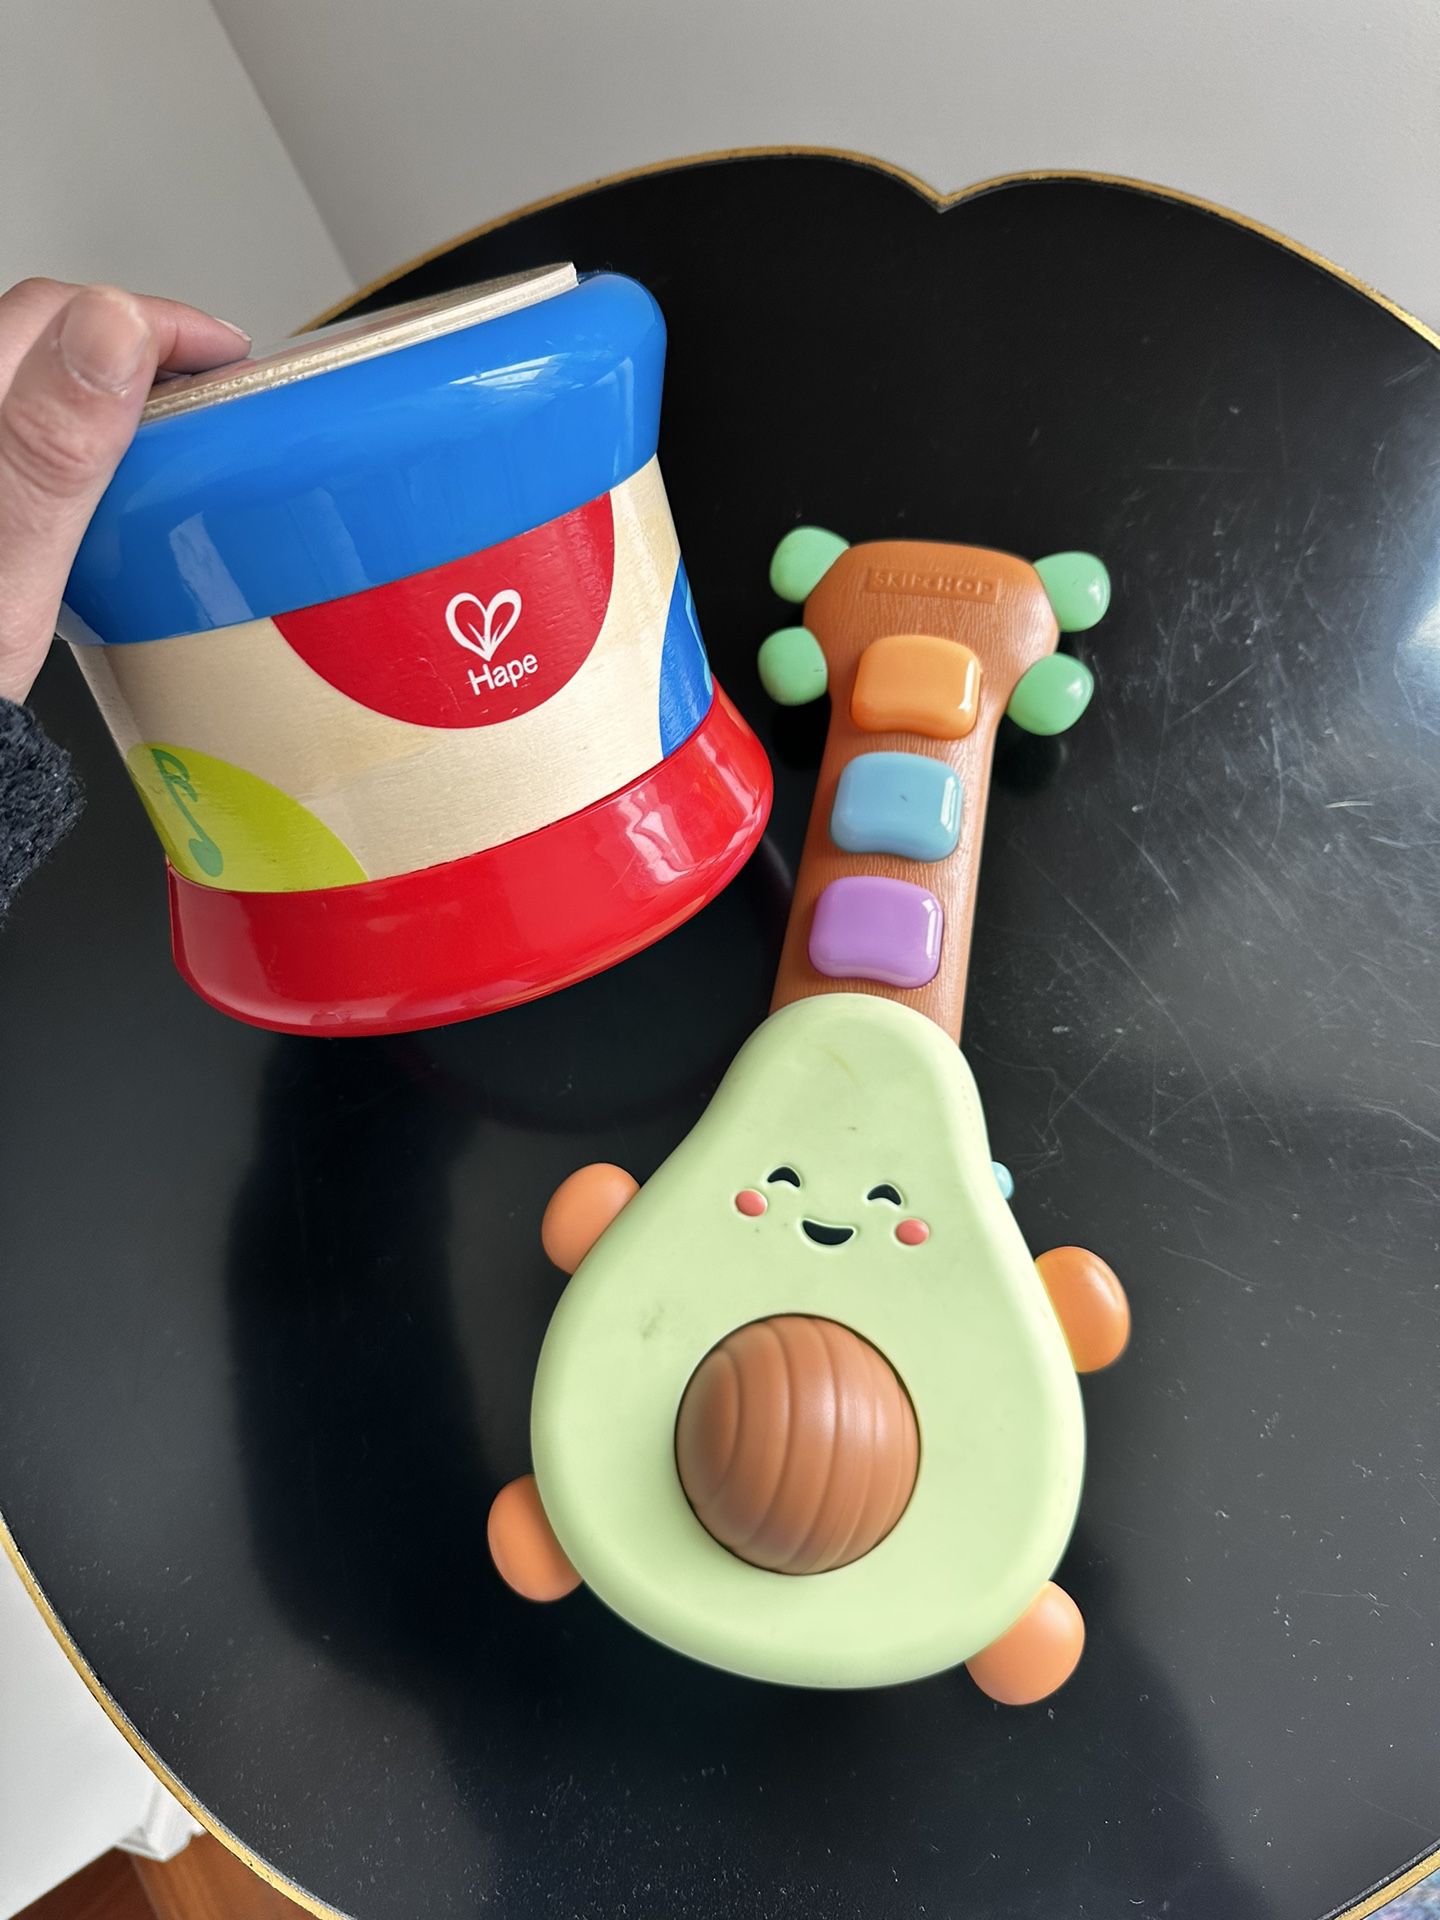 Music Toys For Baby / Toddler 